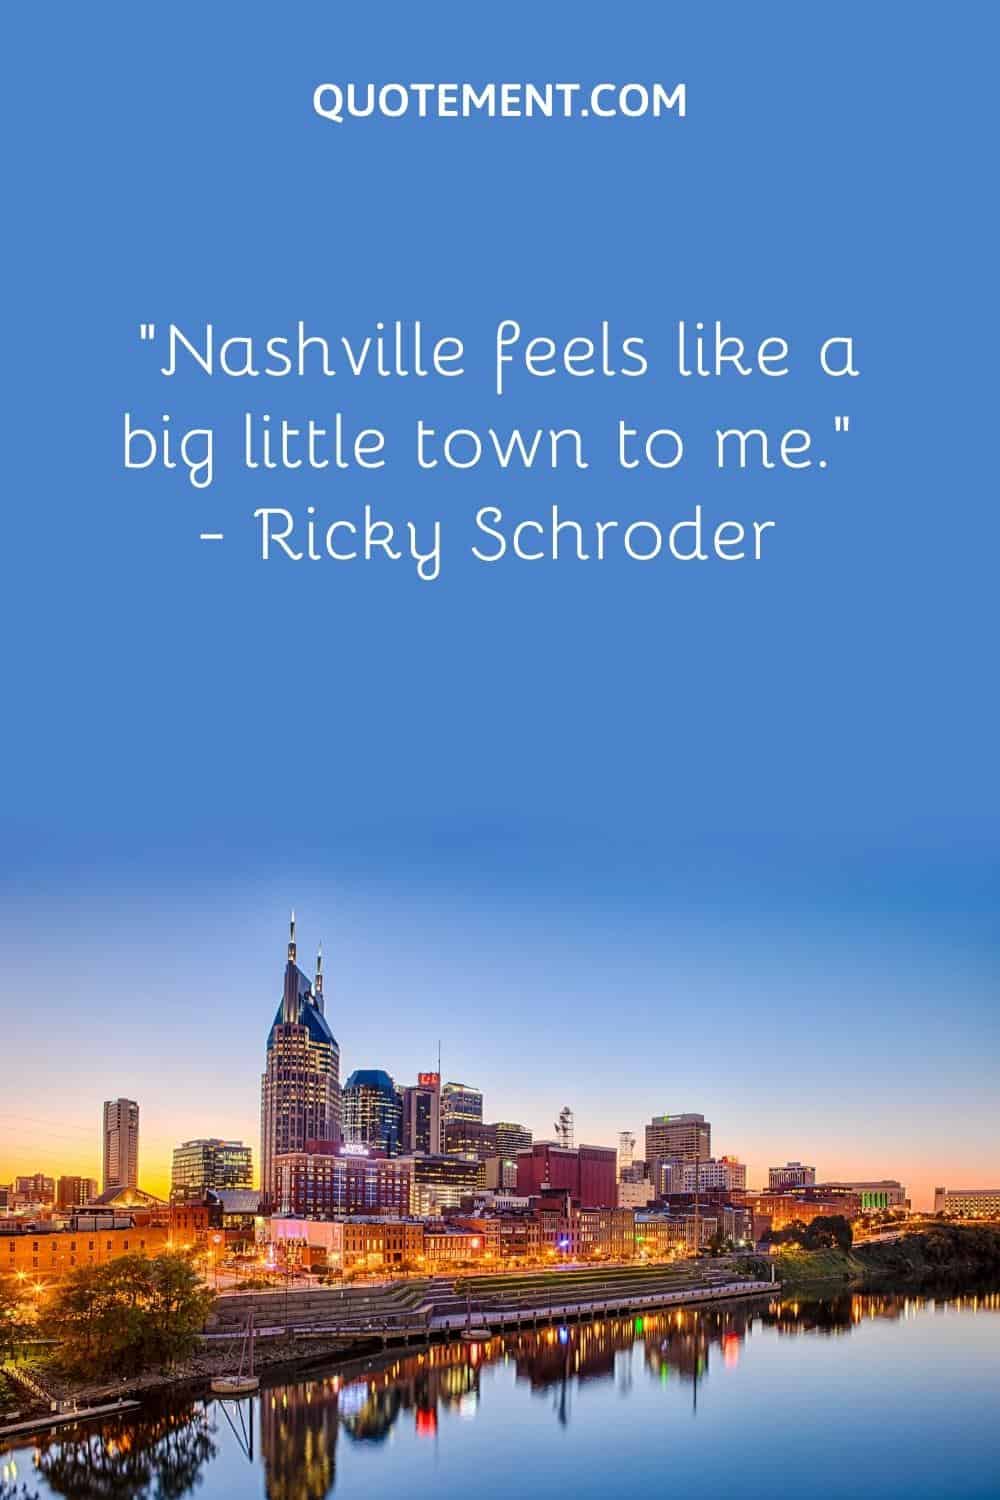 “Nashville feels like a big little town to me.” — Ricky Schroder